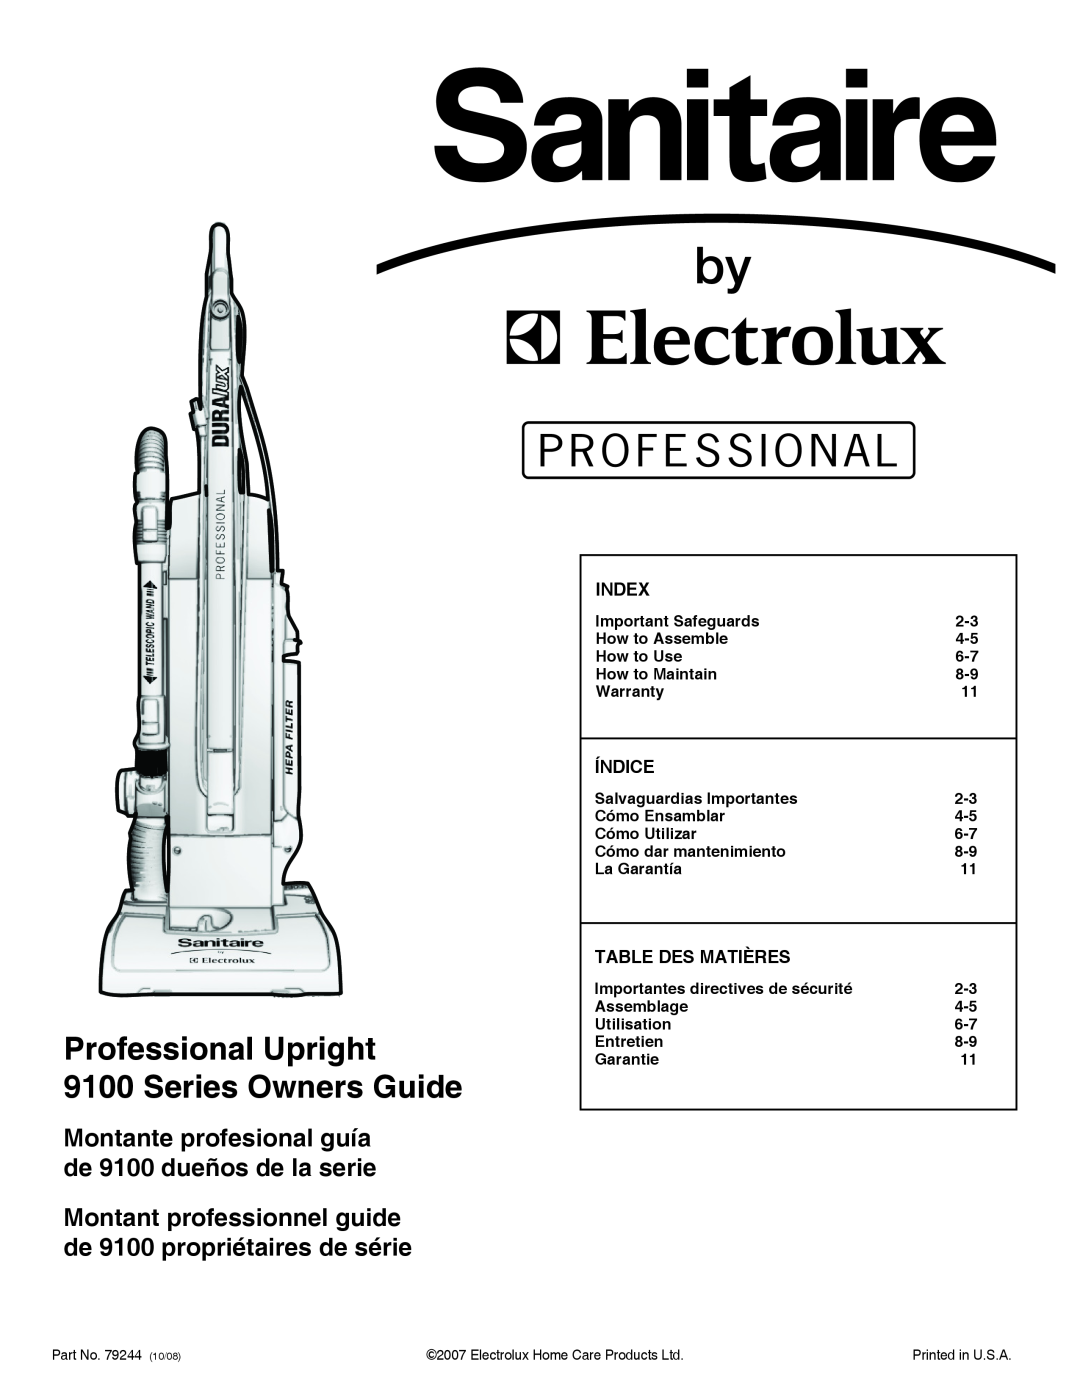 Sanitaire warranty Professional Upright 9100 Series Owners Guide, Index, índice, Table Des Matières 